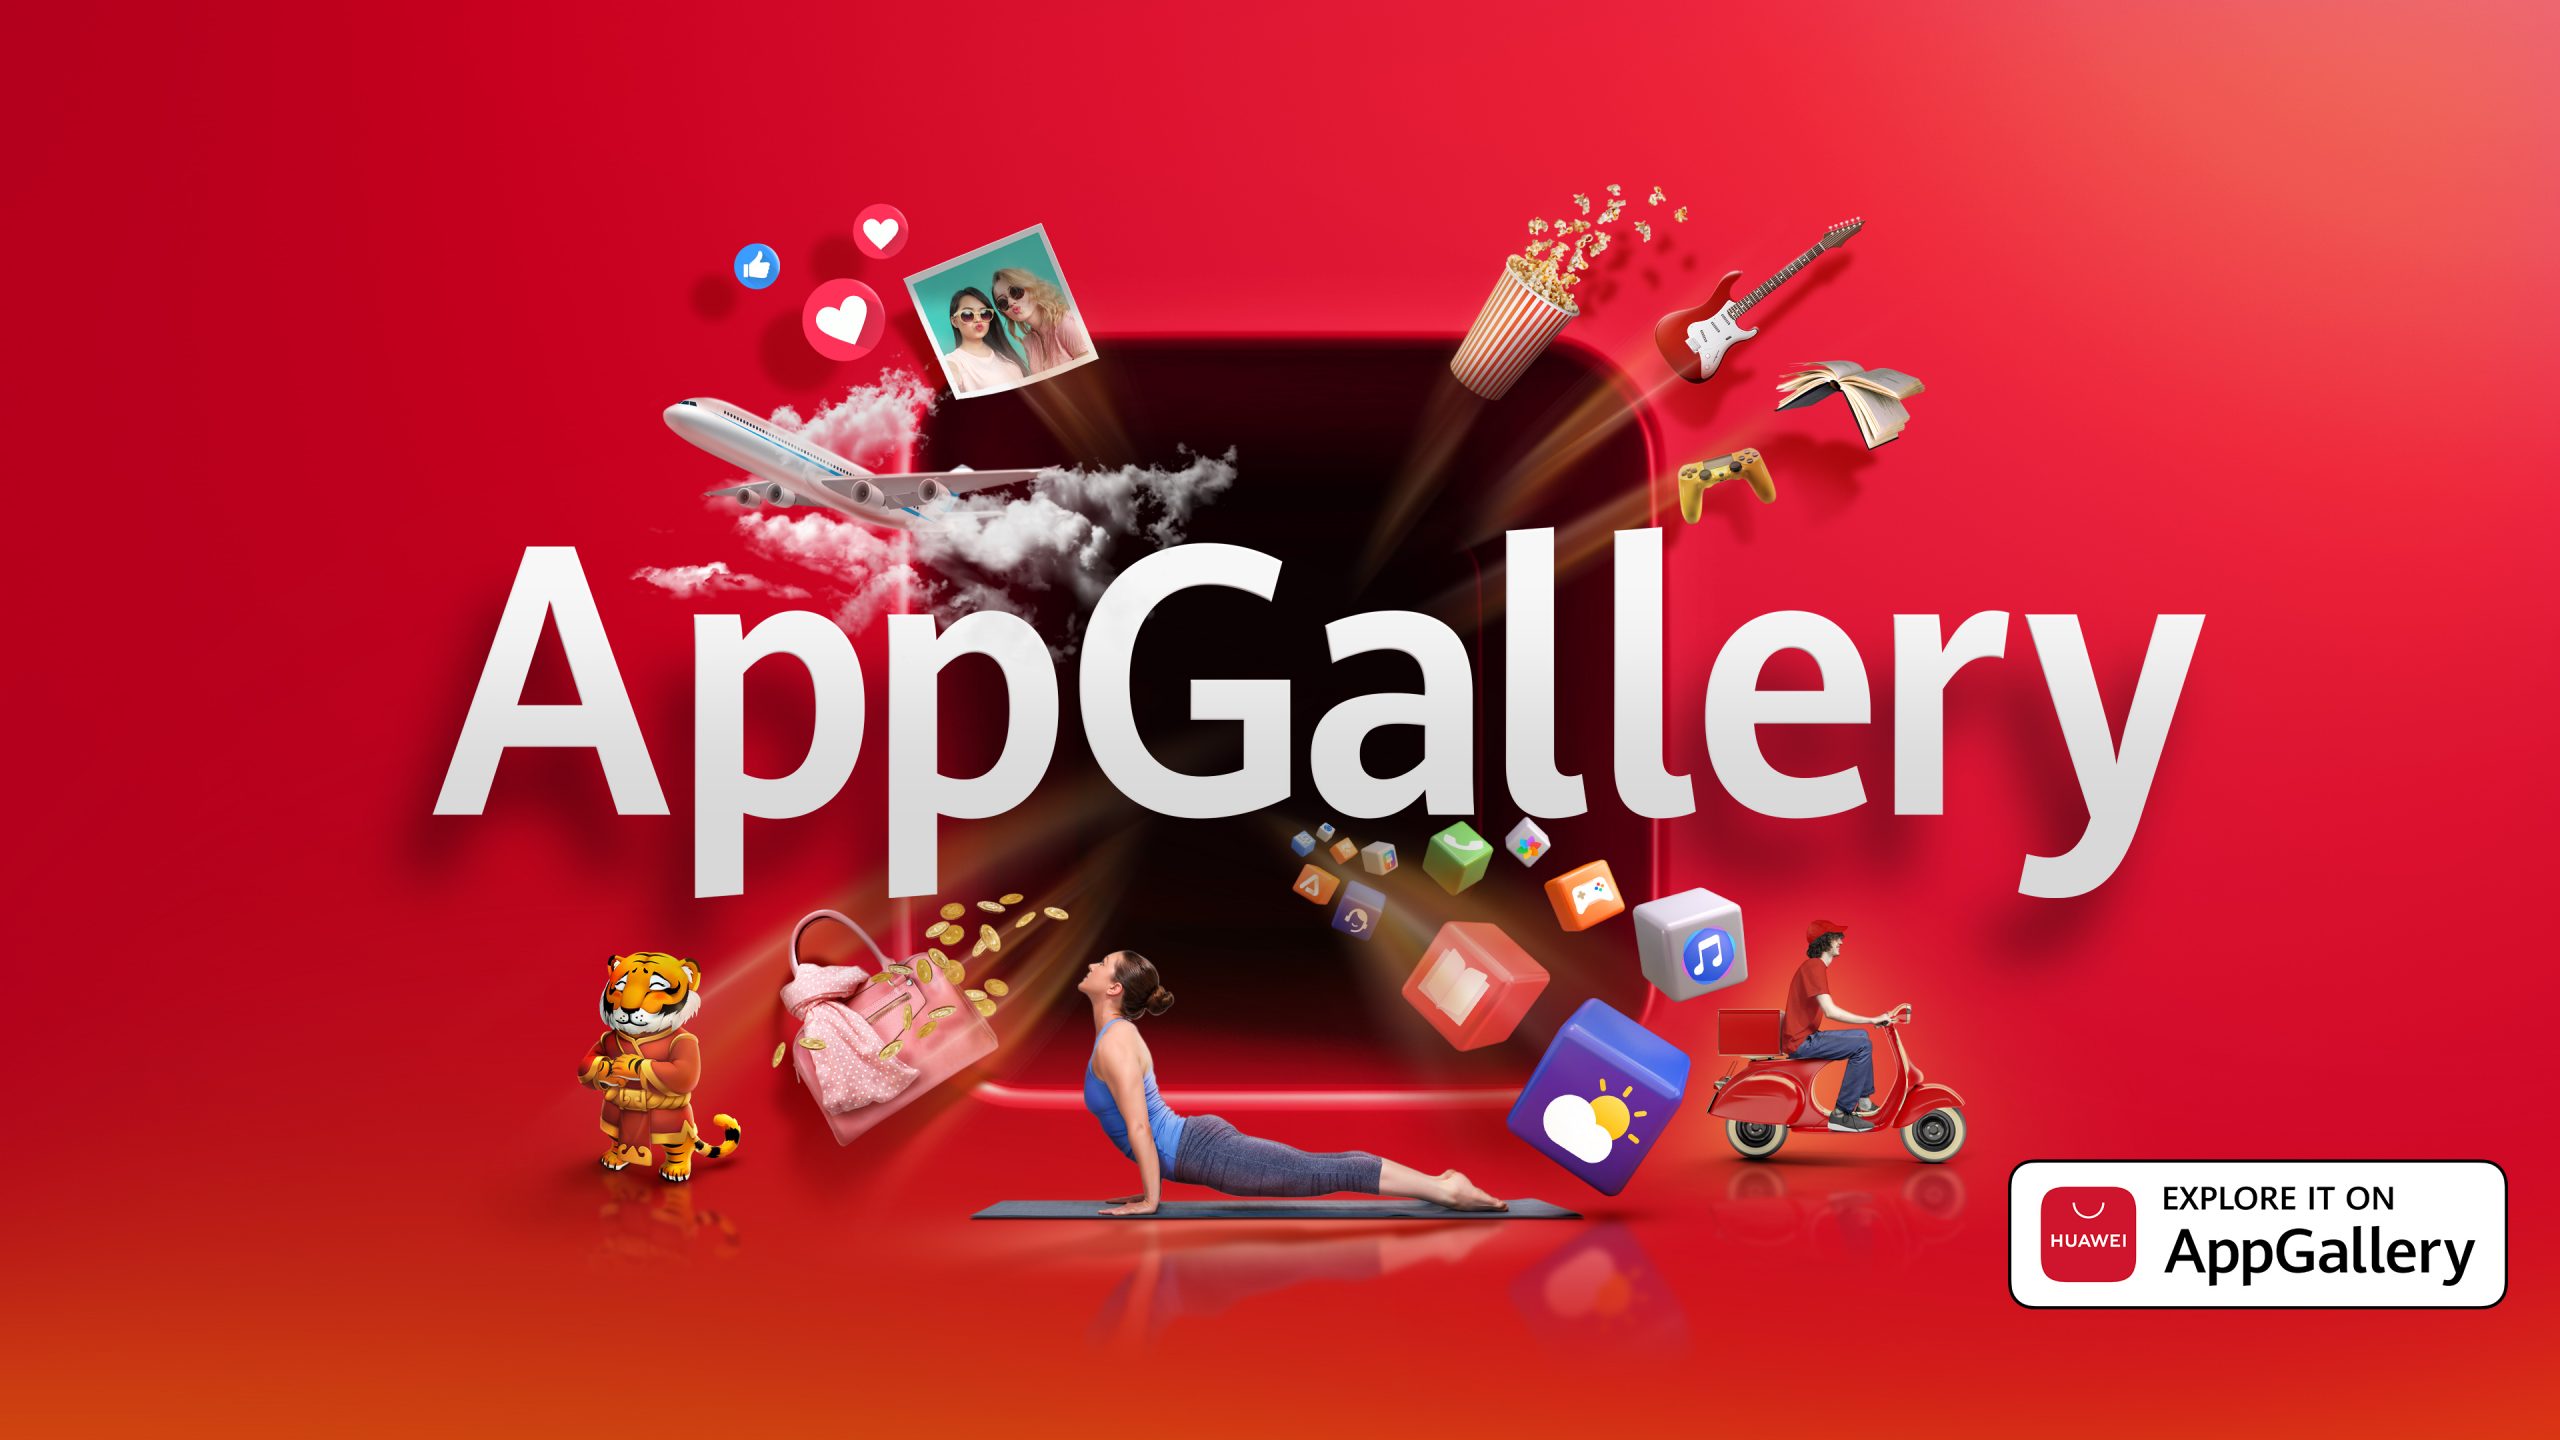 Huawei Launches The HUAWEI AppGallery, One Of The Top Three App Distribution Platforms